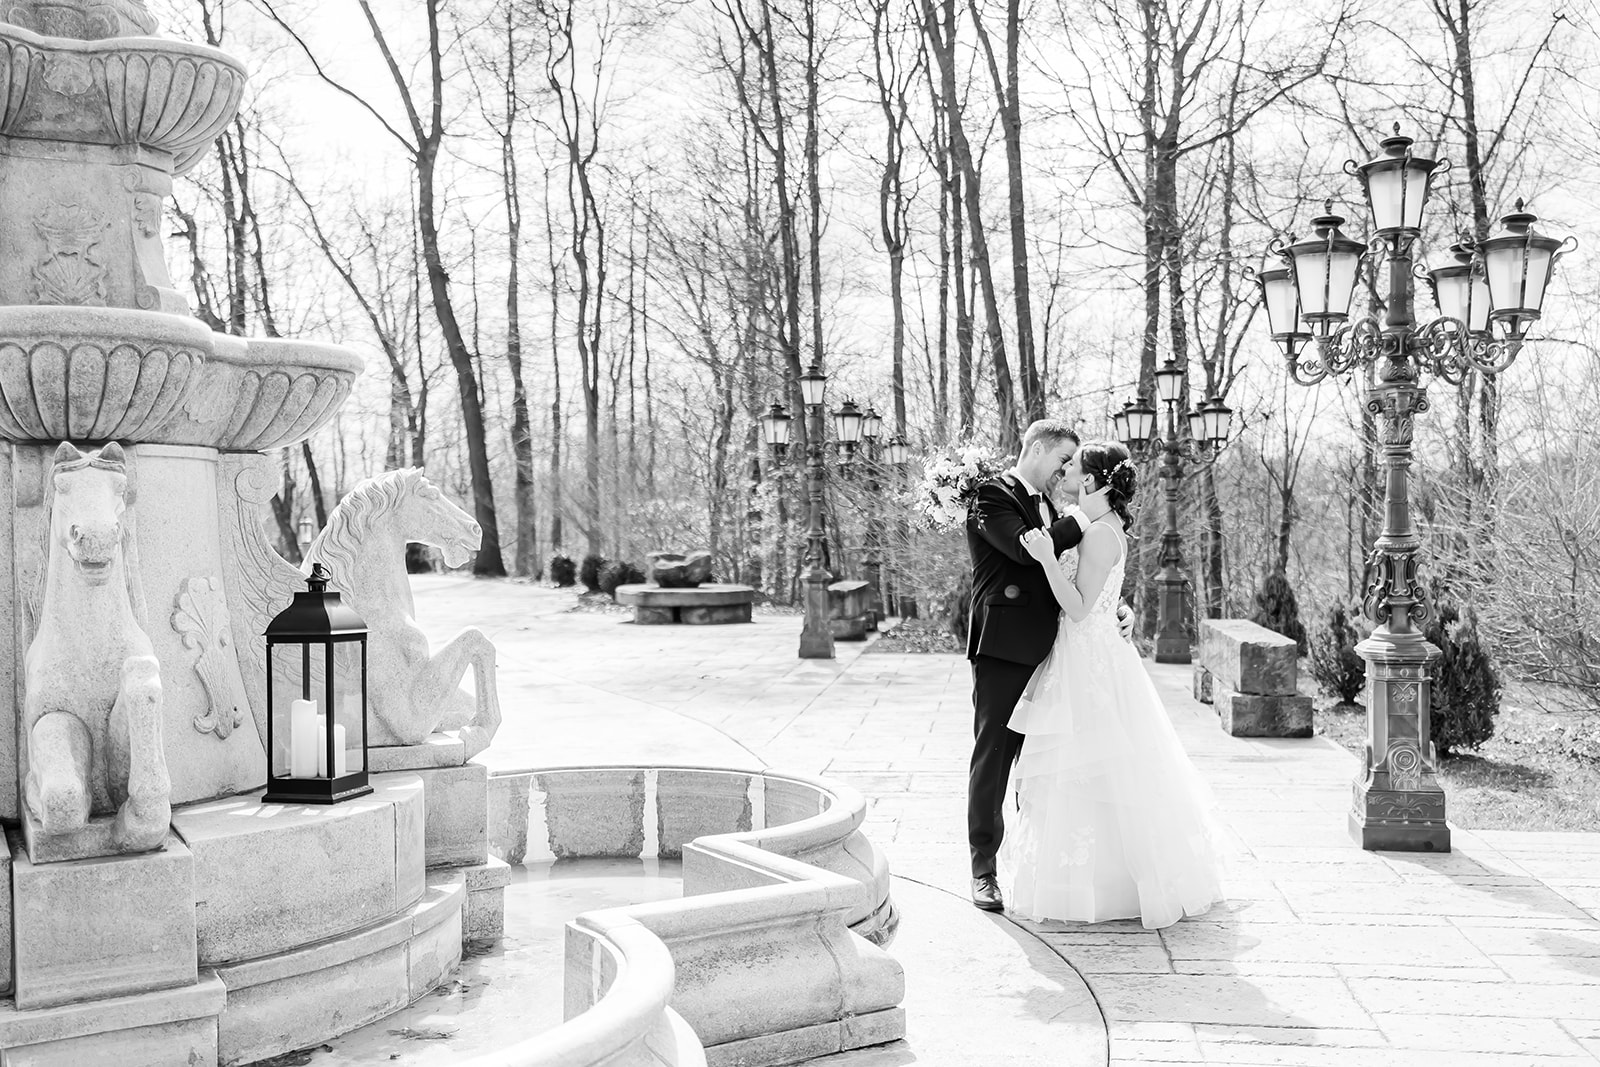 A snowy and cold wedding at Bella Amore Enchanted Acres